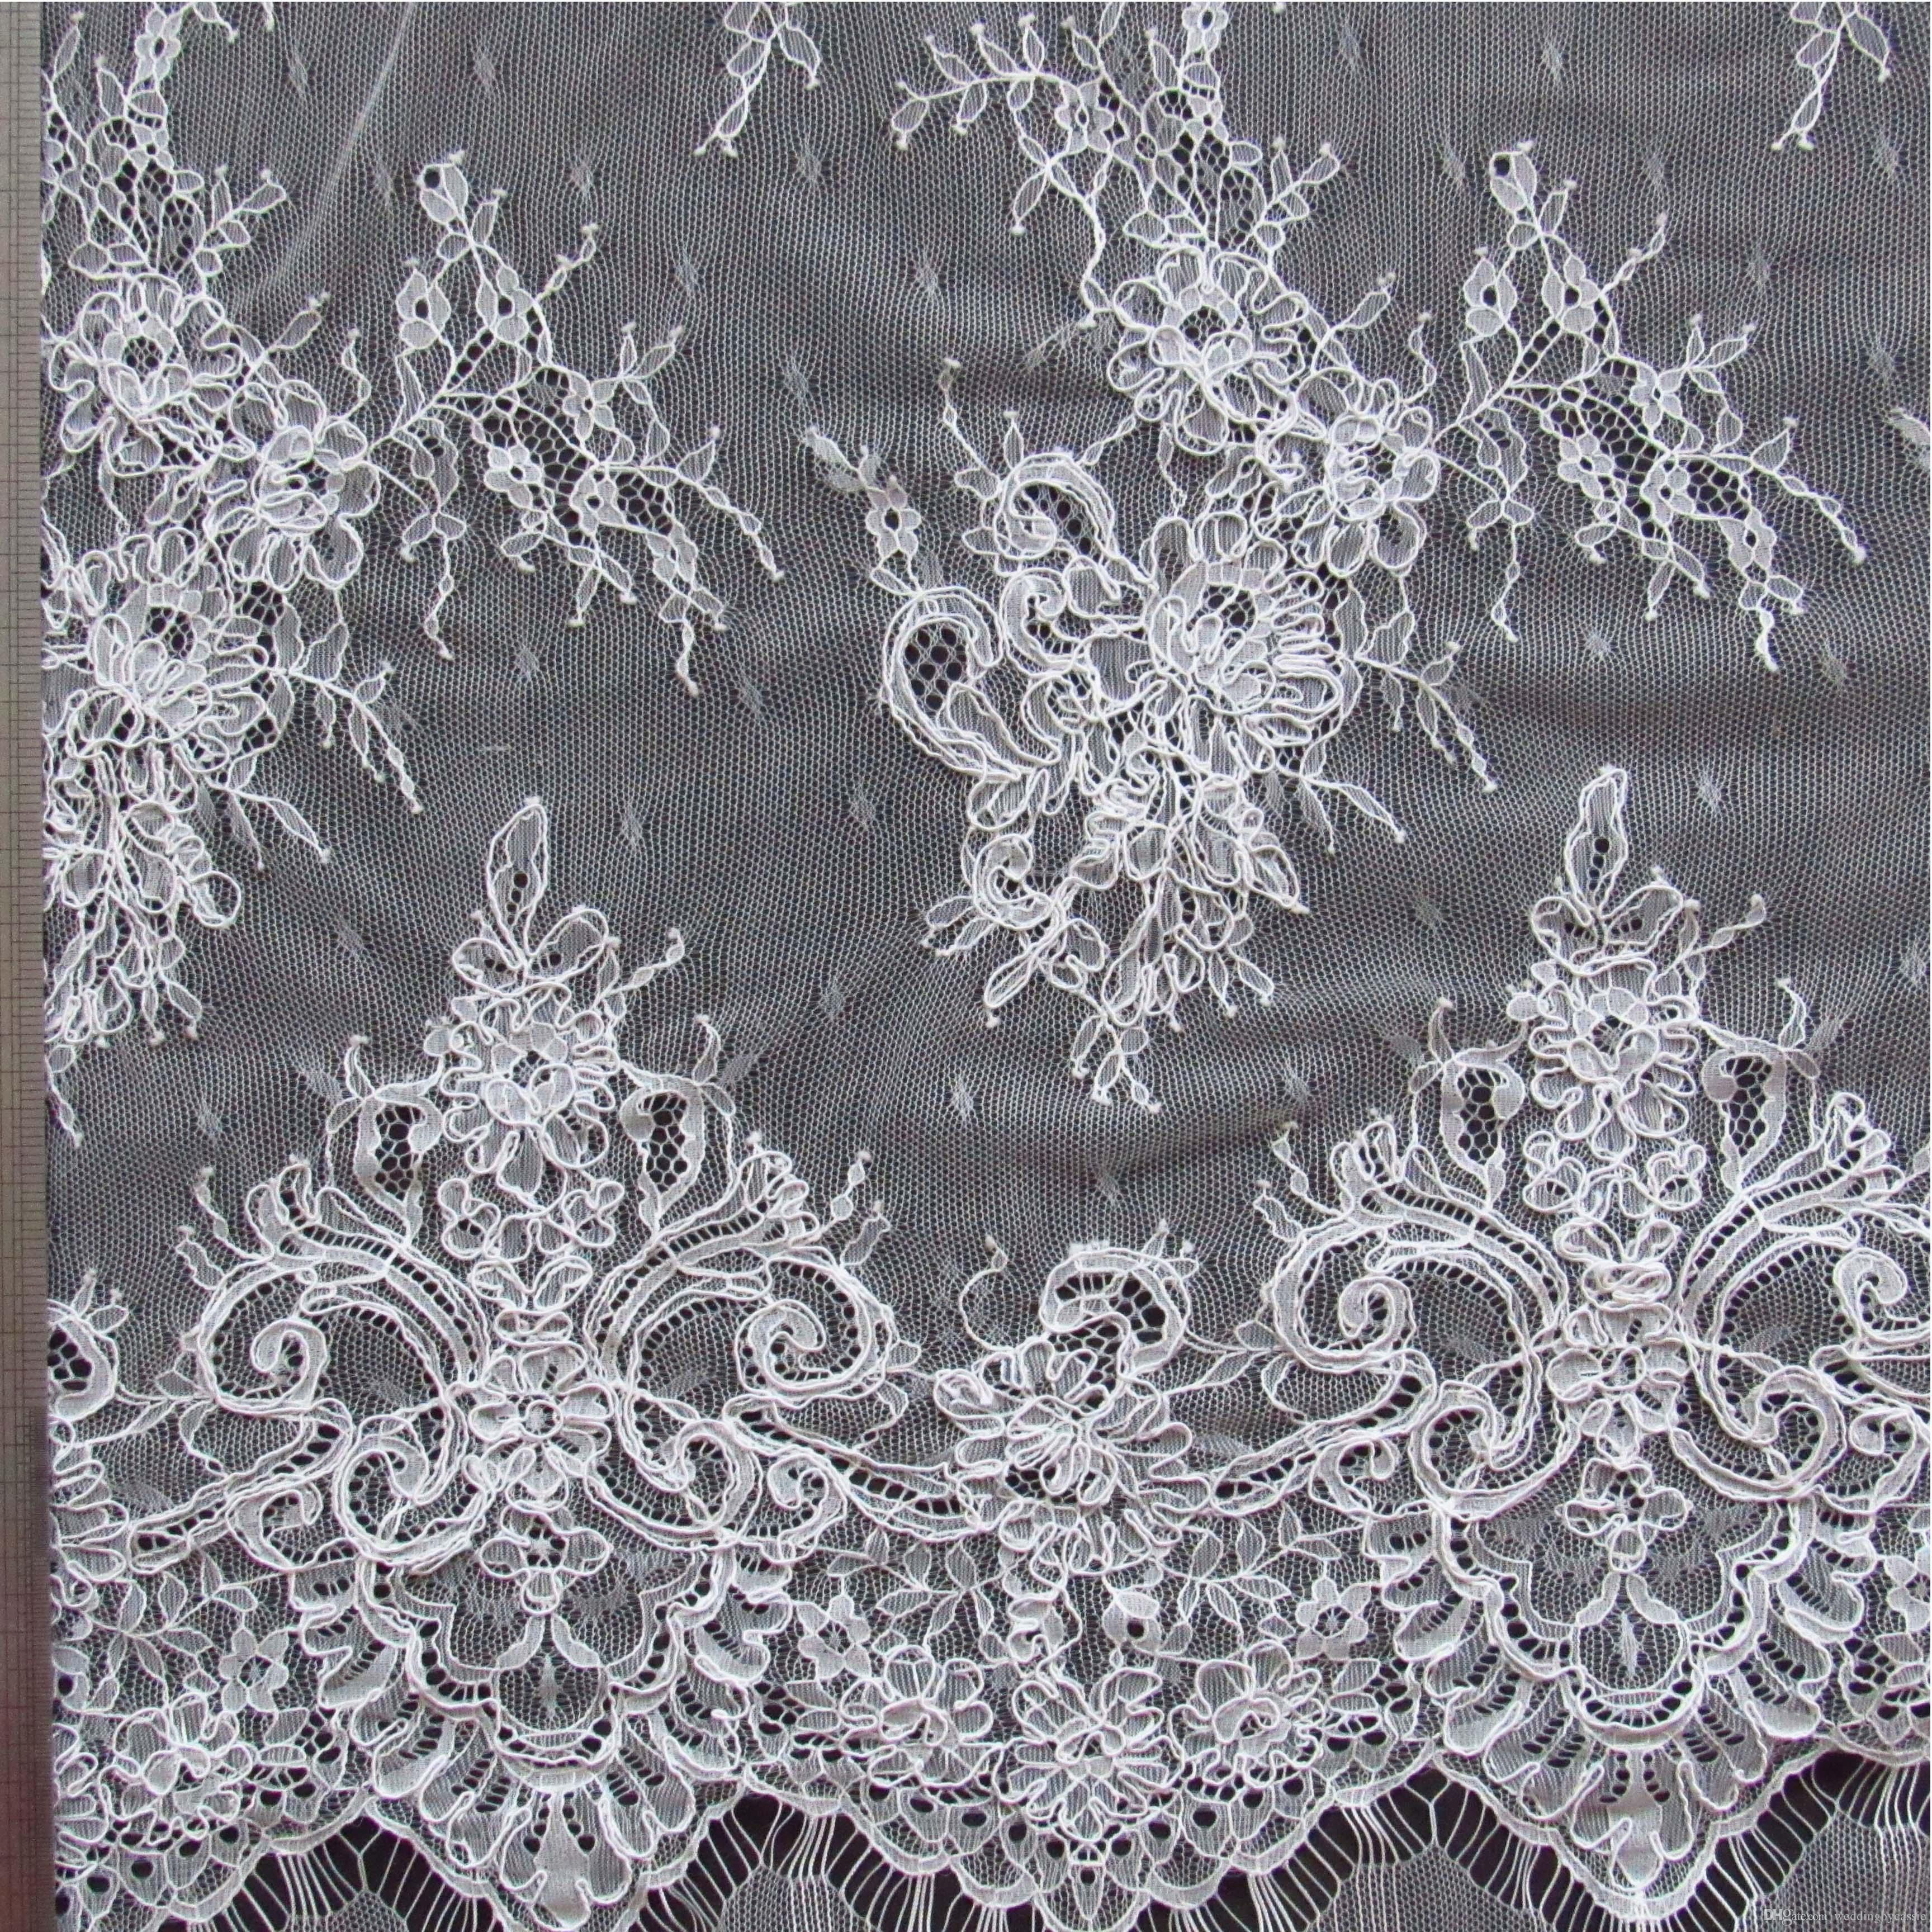 Wedding Dress Embroidery Patterns High Quality 3 Meters White French Lace Wedding Dress Gauze Clothing Fabric Materials Dz05